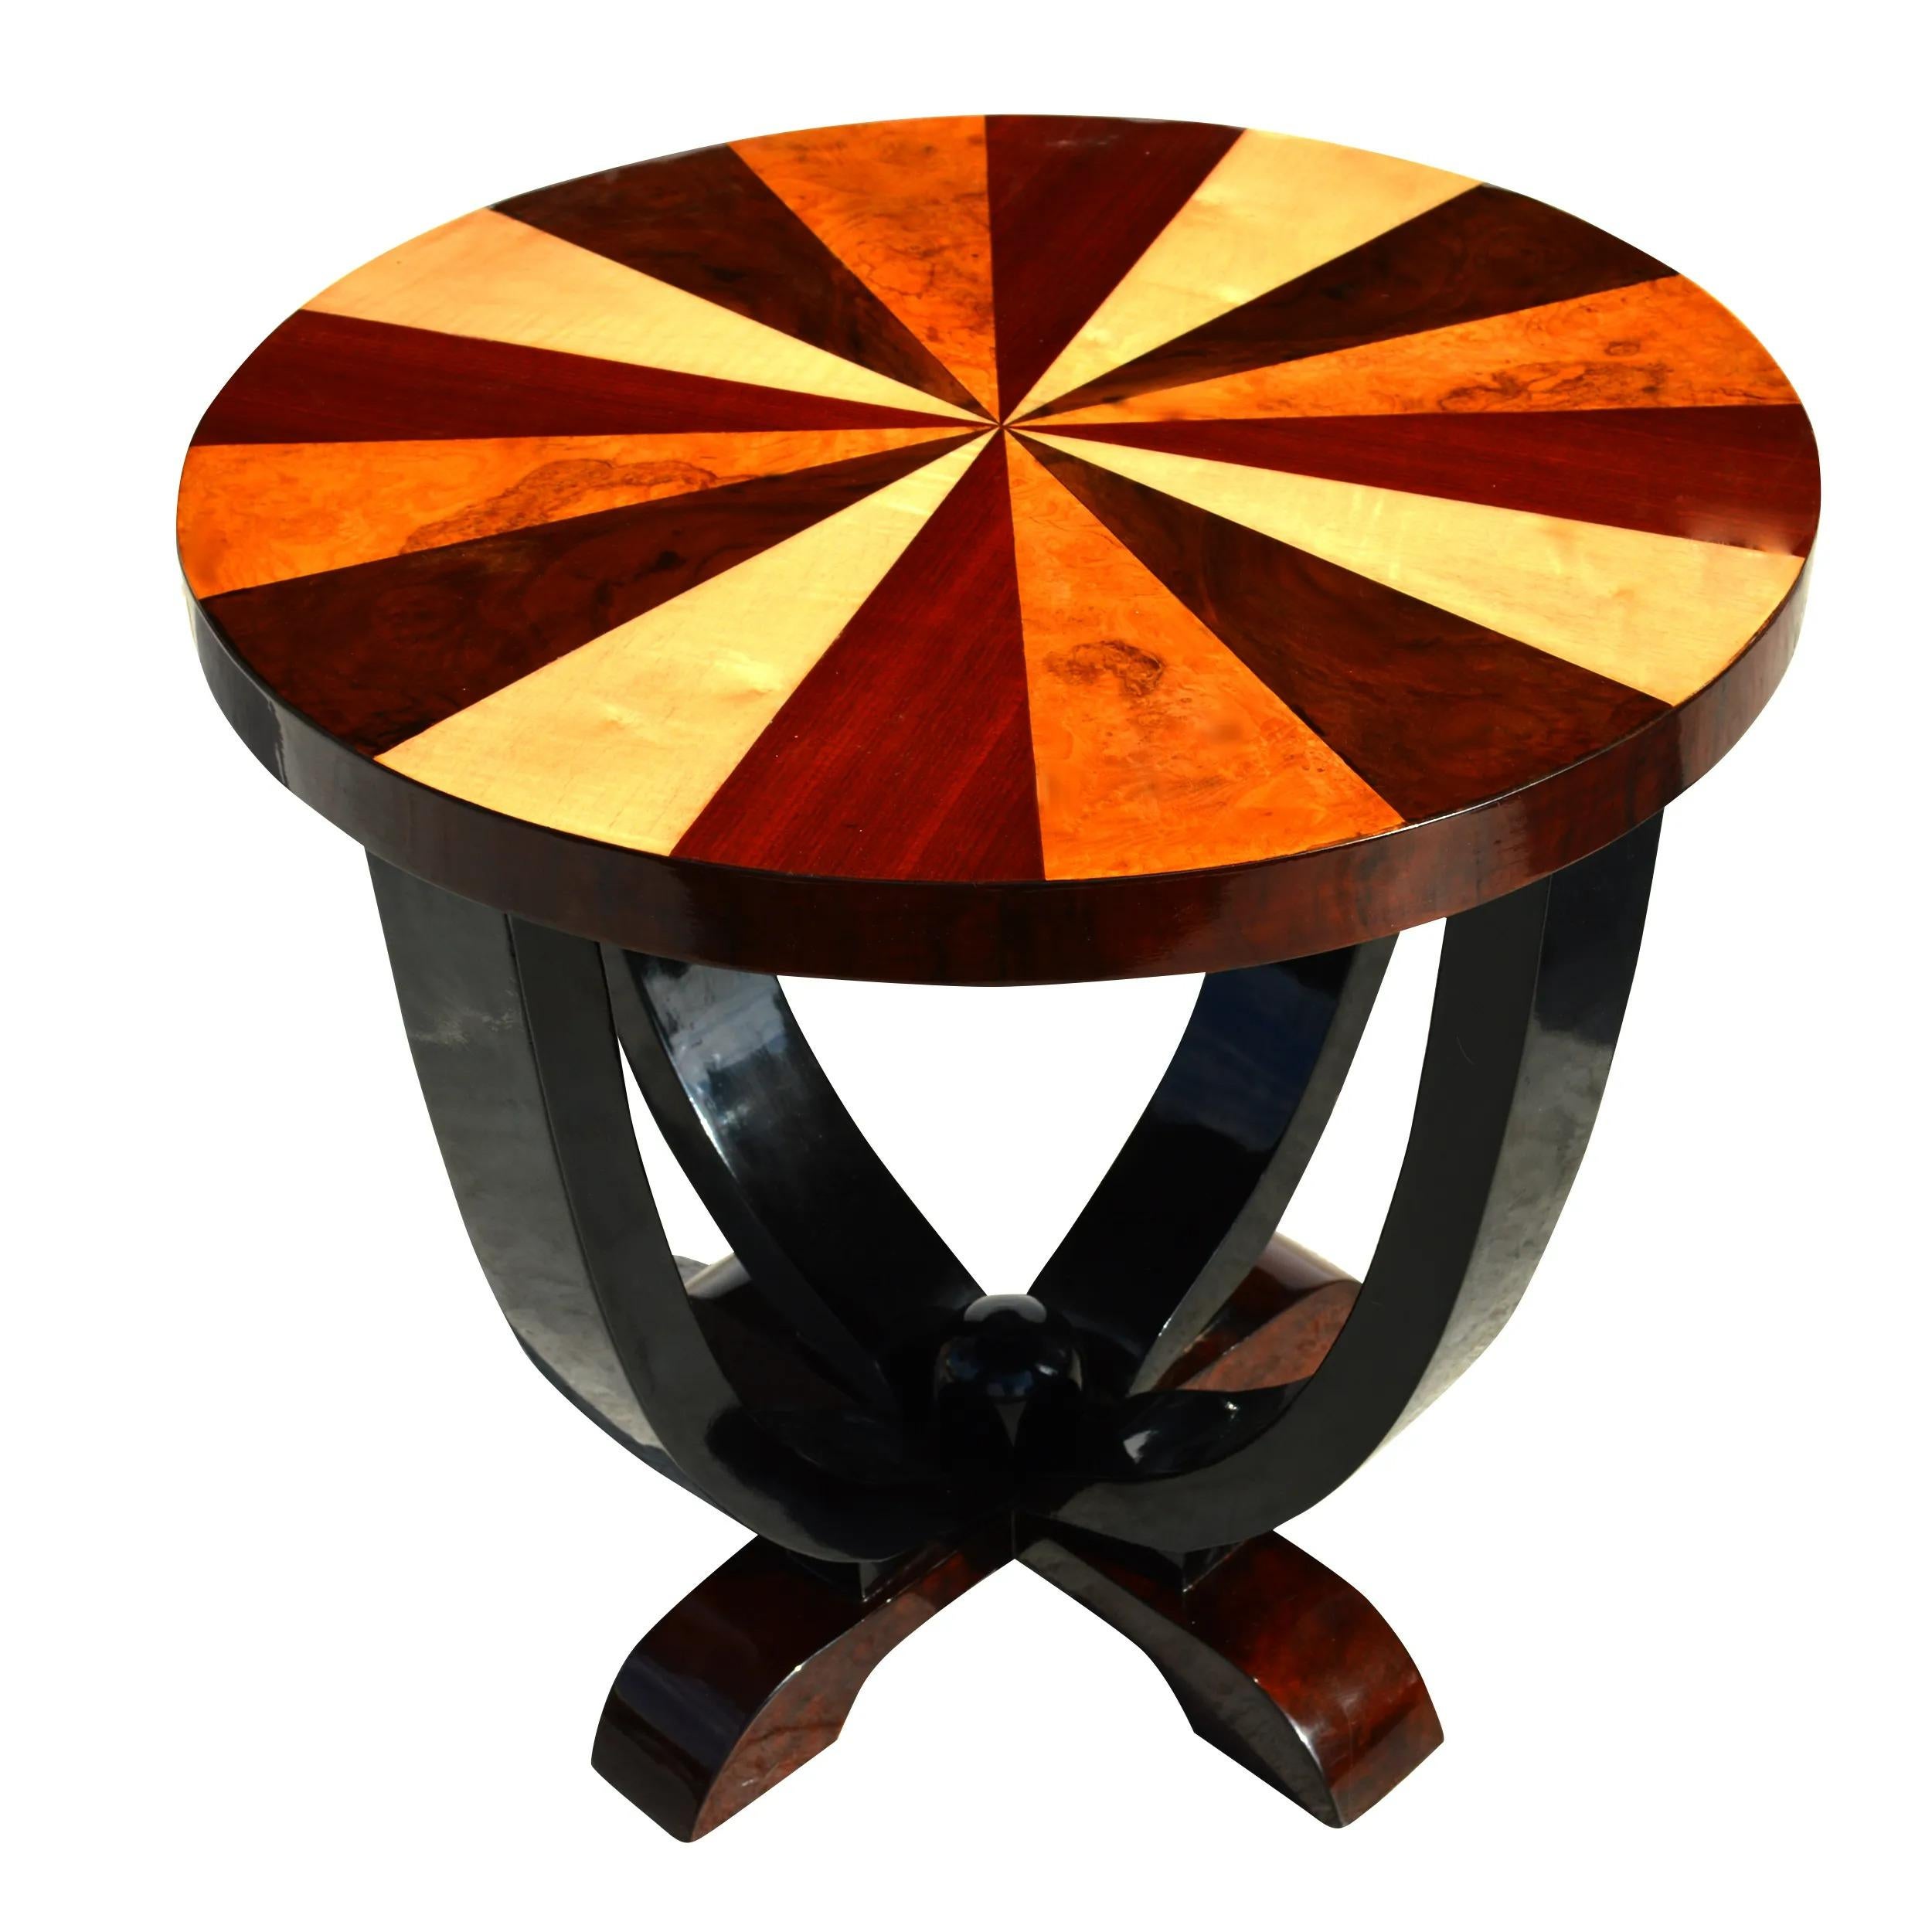 Art Deco Style Side Table

Rich burl and rosewood are combined in an alternating pattern on a pedestal base.

See complimentary console available in last photo.